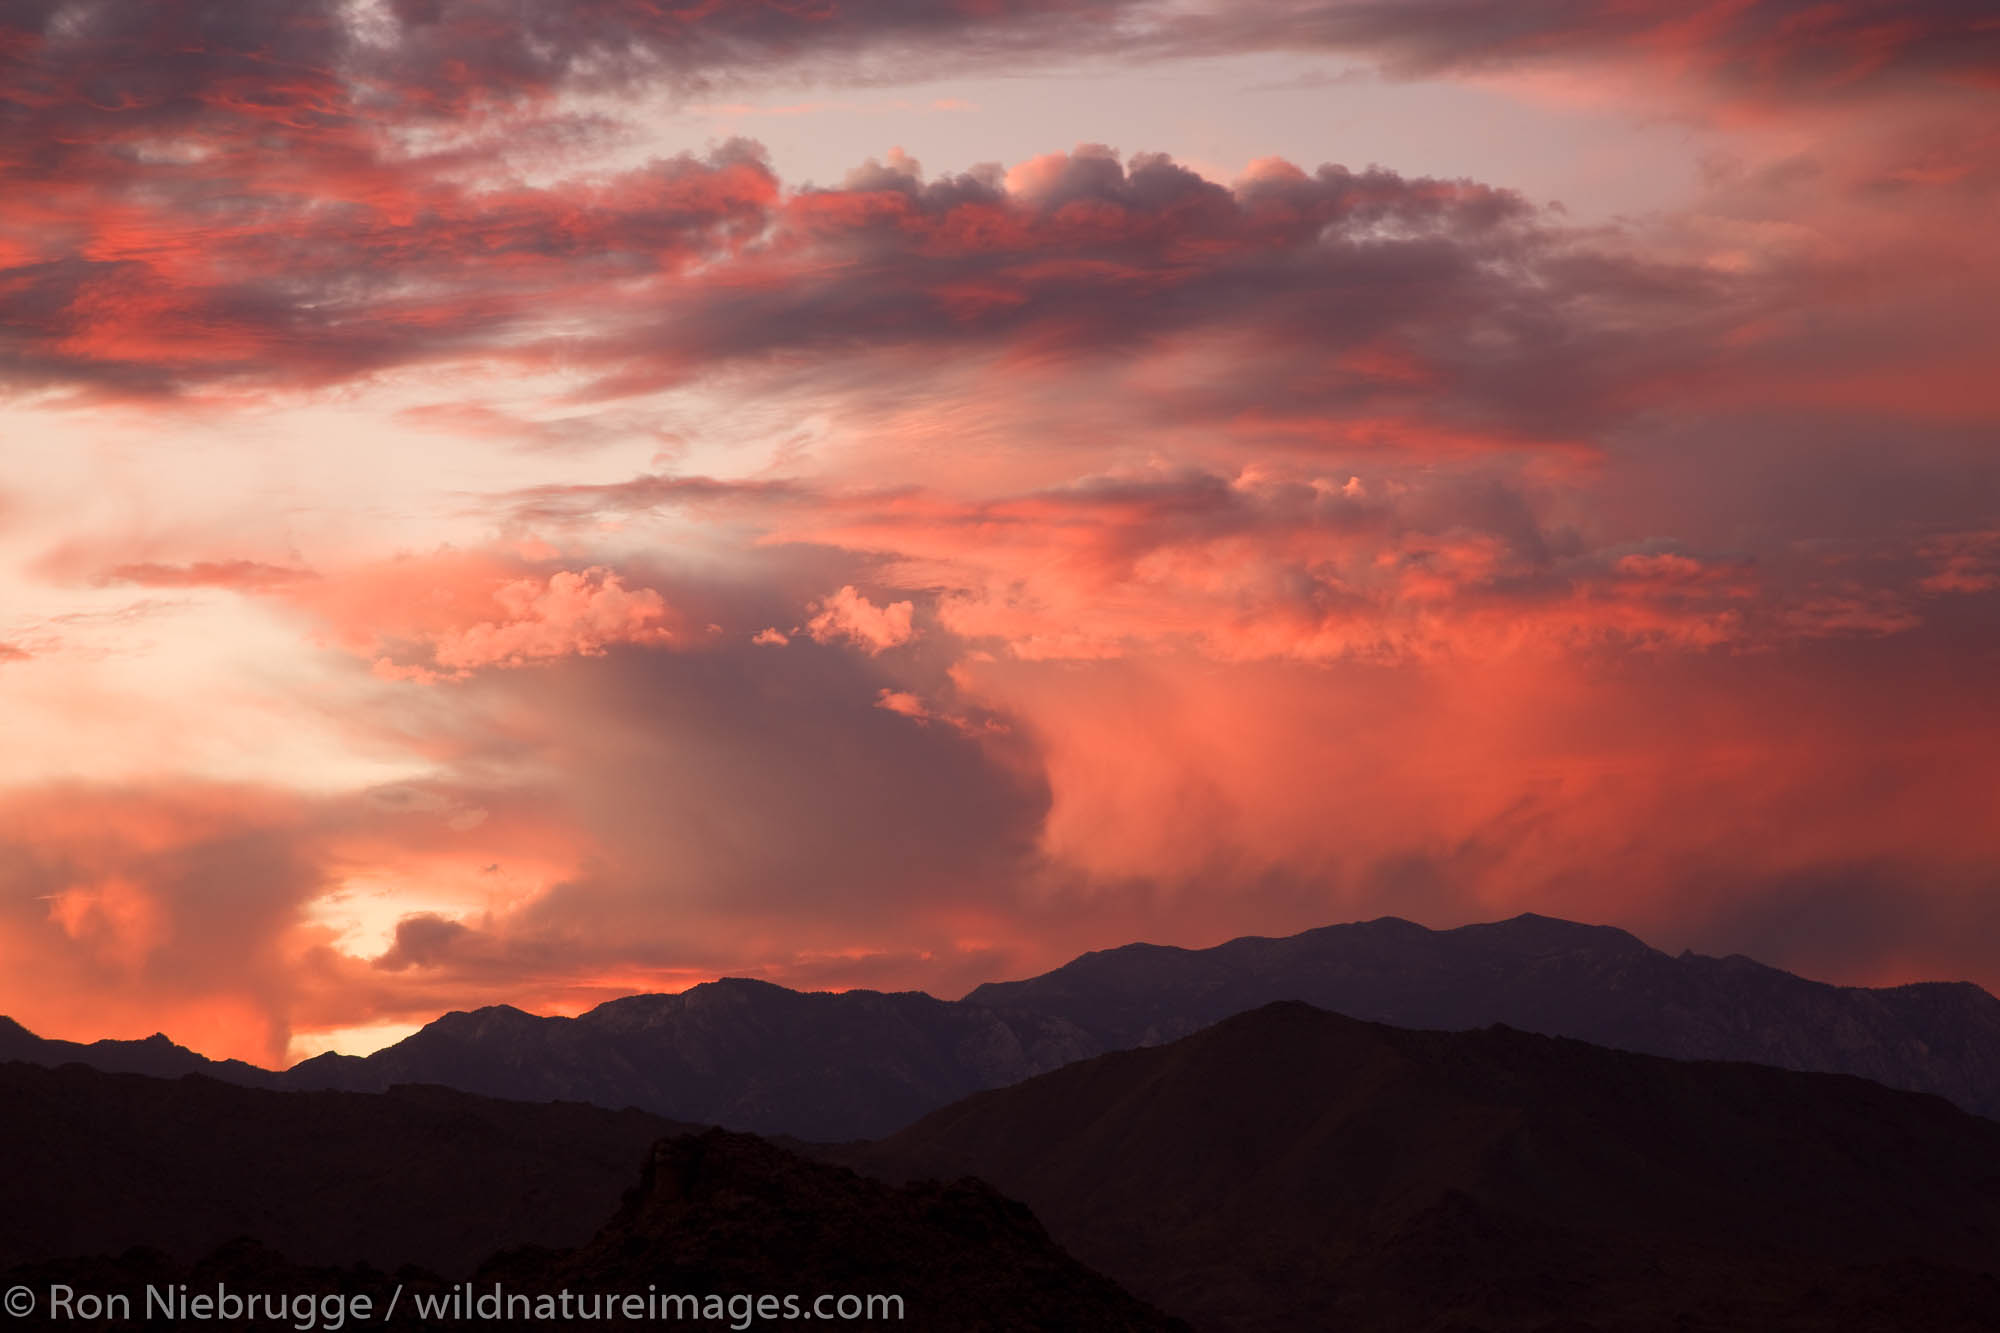 Sunset over the San Jacinto Mountains from Palm Desert and the Coachella Valley, California.